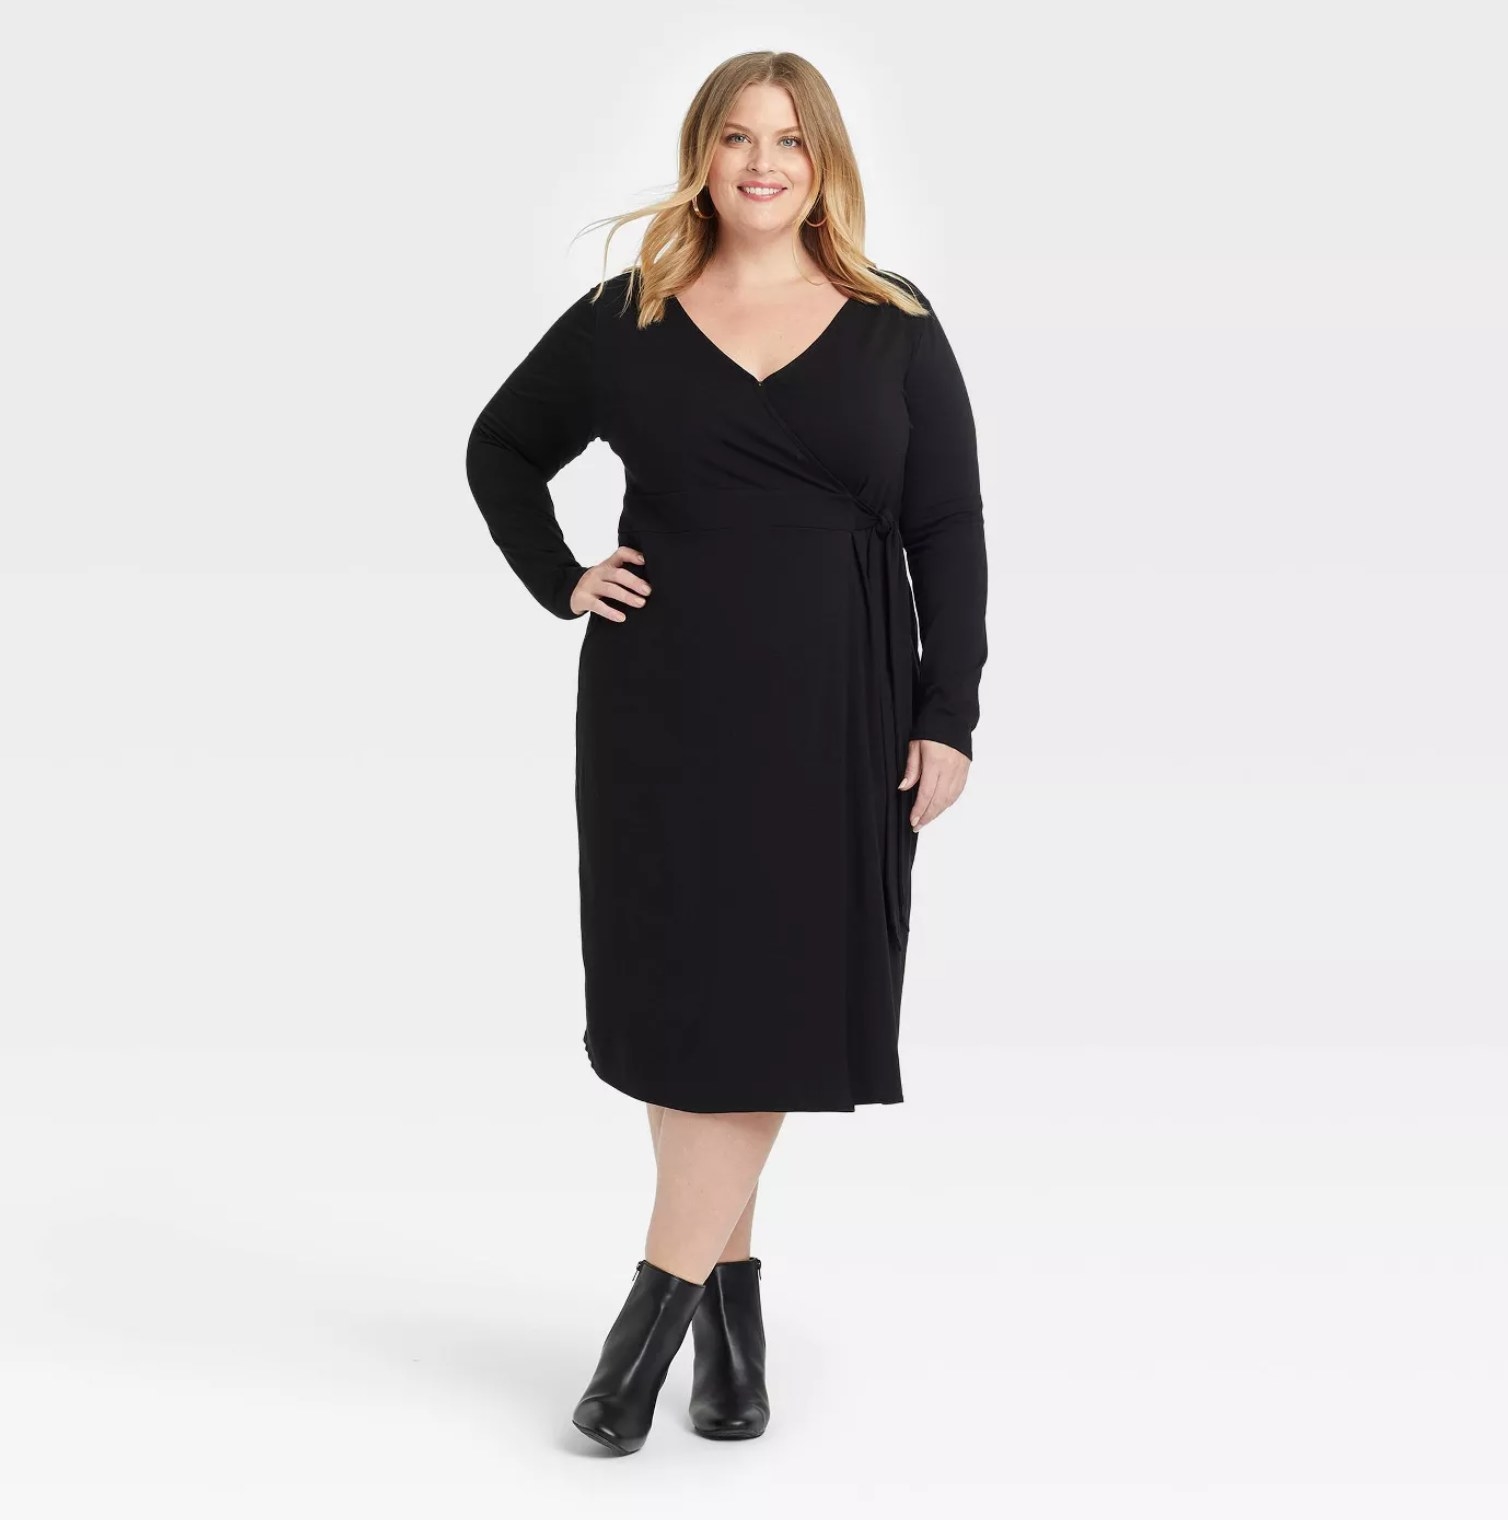 model wearing the wrap dress in black with black booties